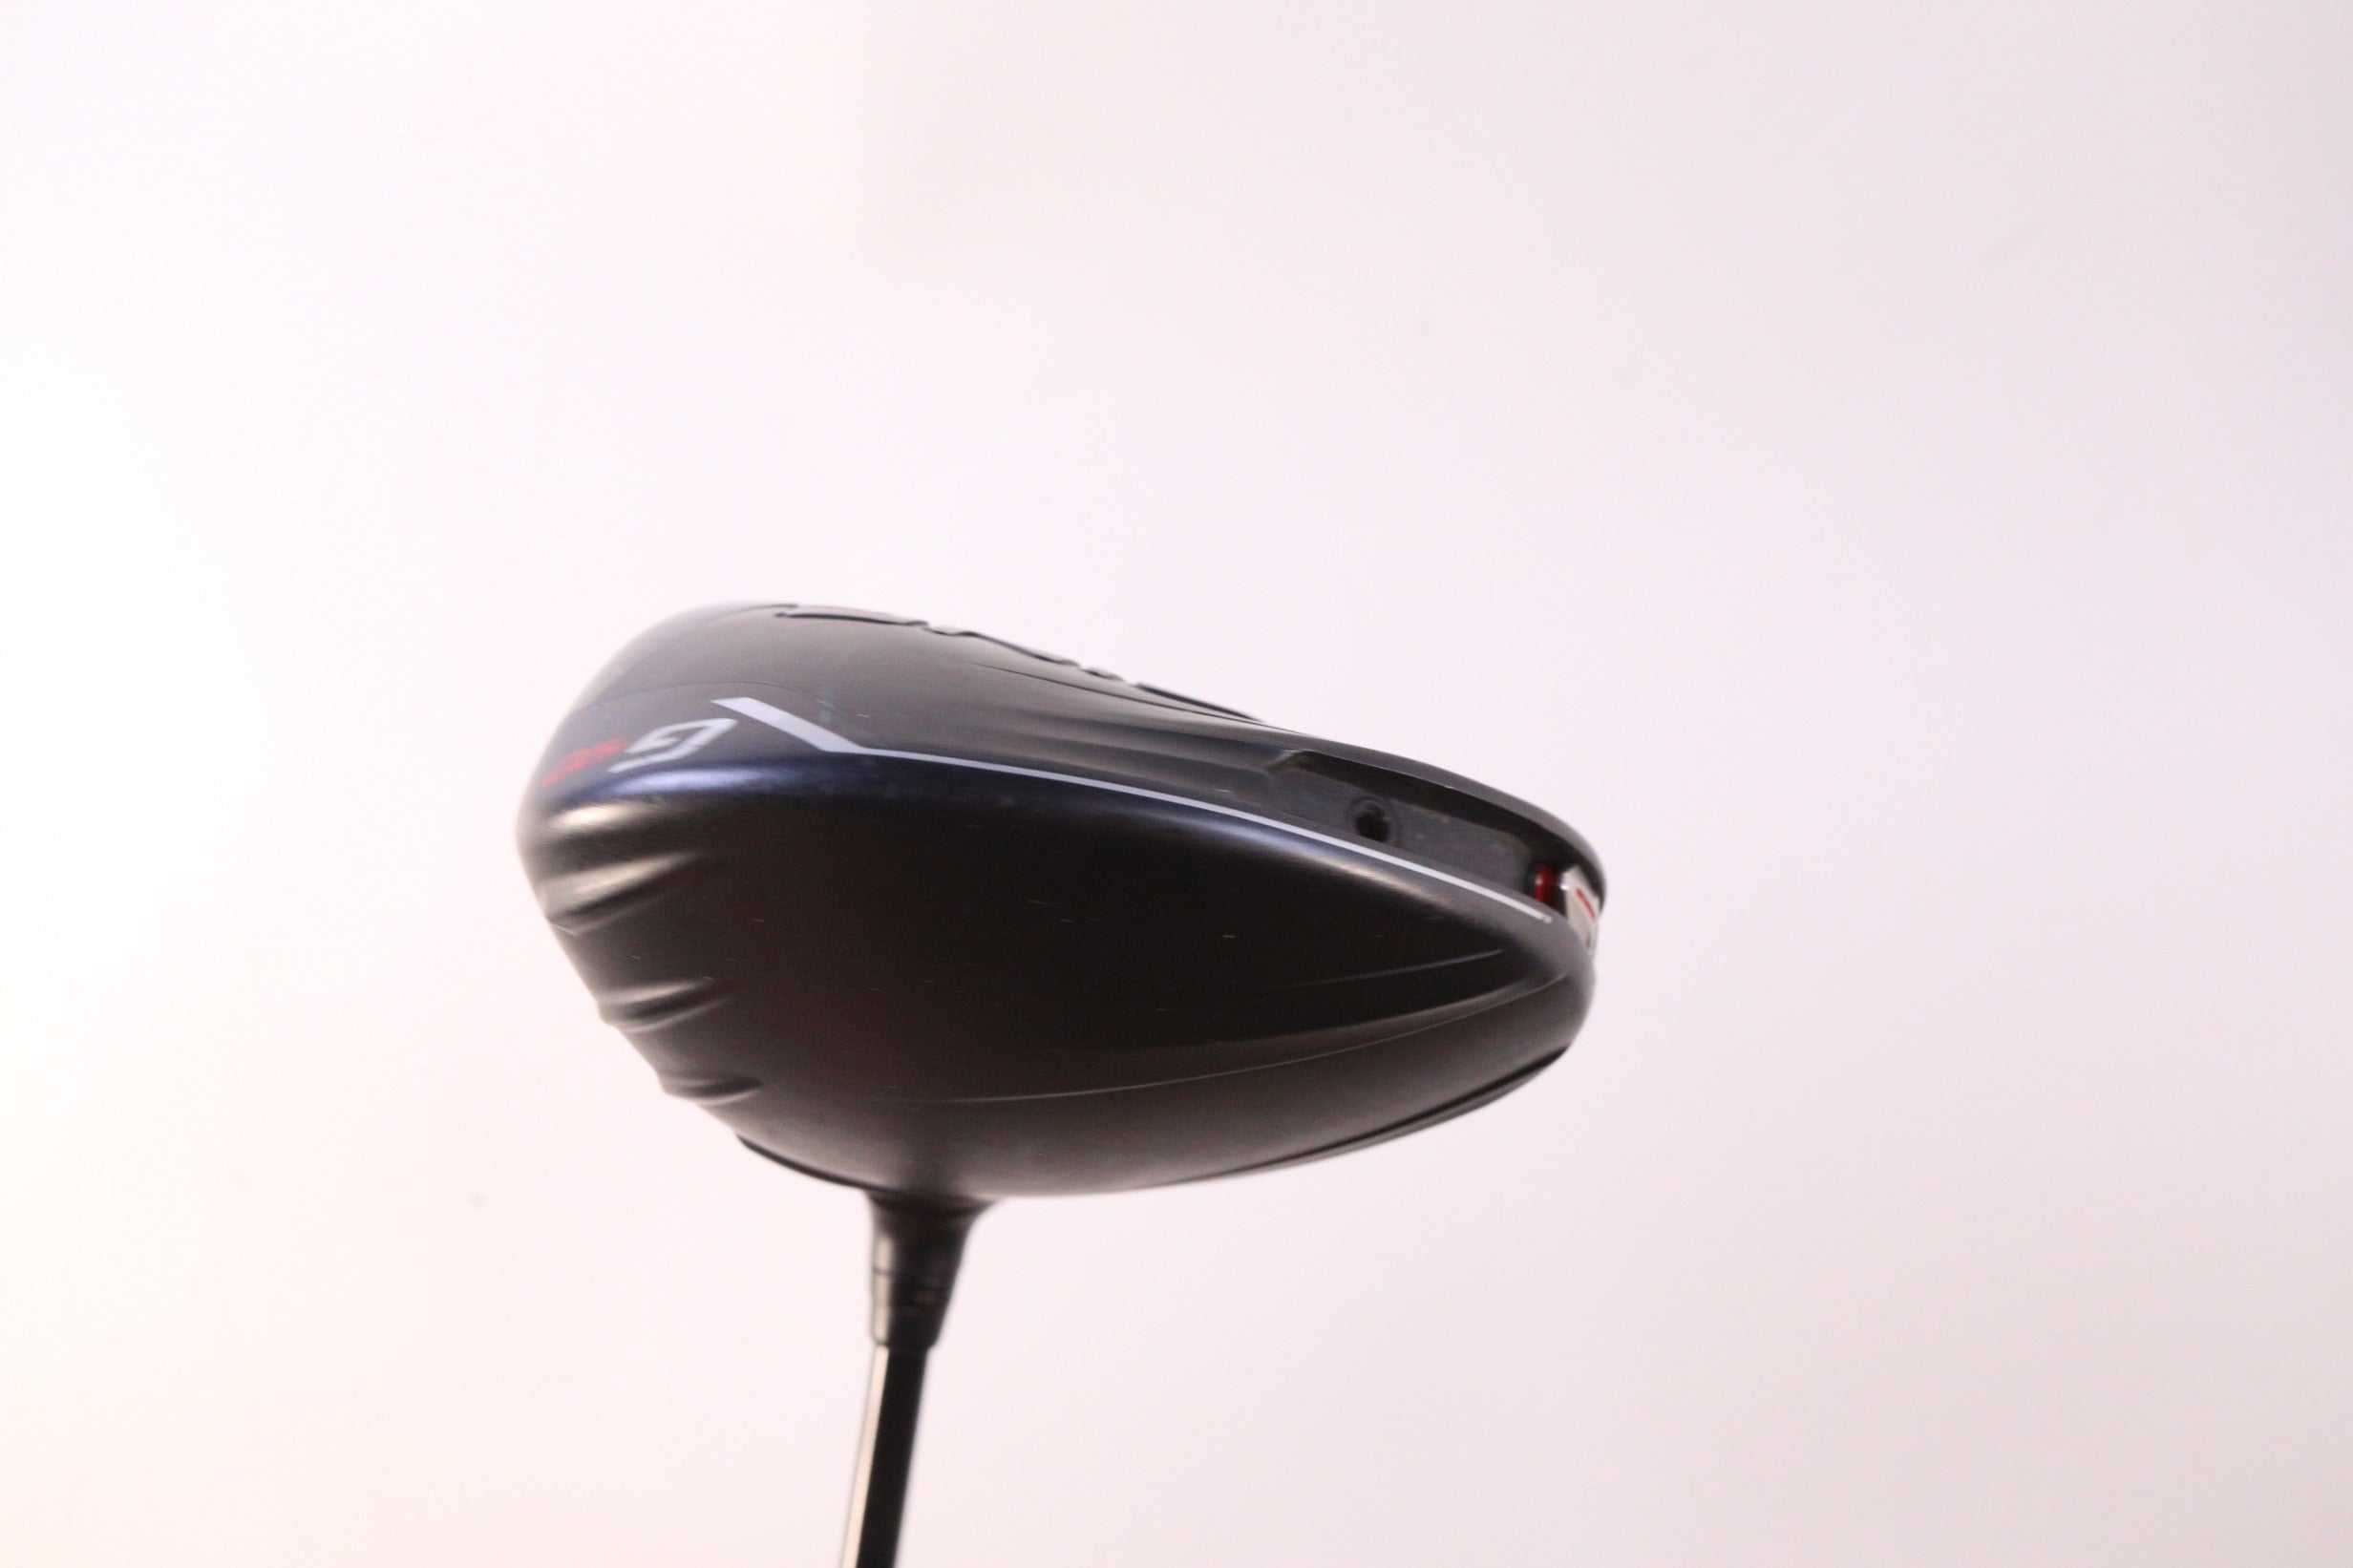 Used Ping G410 LST Driver - Right-Handed - 9 Degrees - Stiff Flex